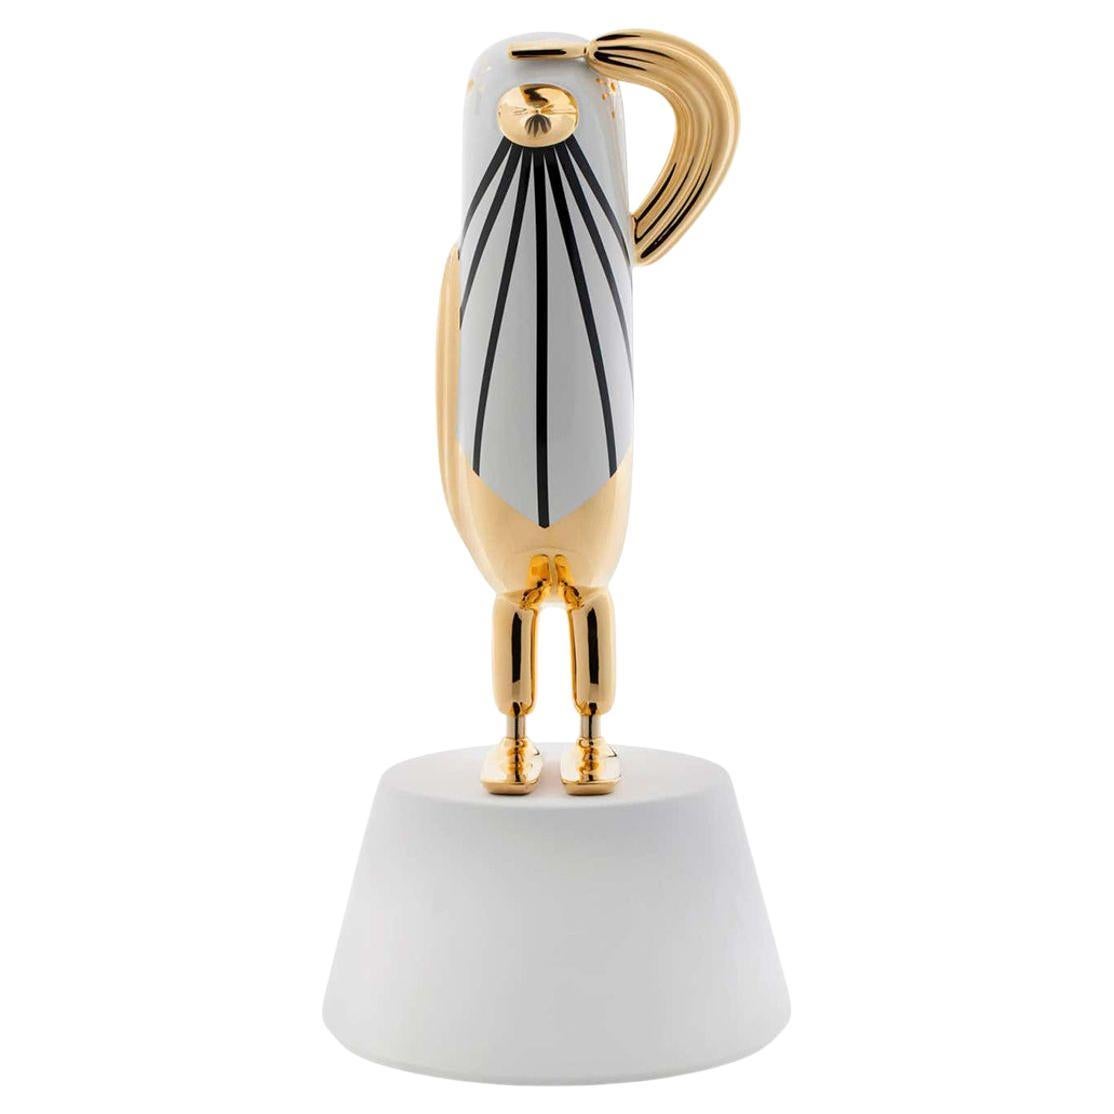 Hopebird Decoration 4 Glossy Gold White And Black By Bosa